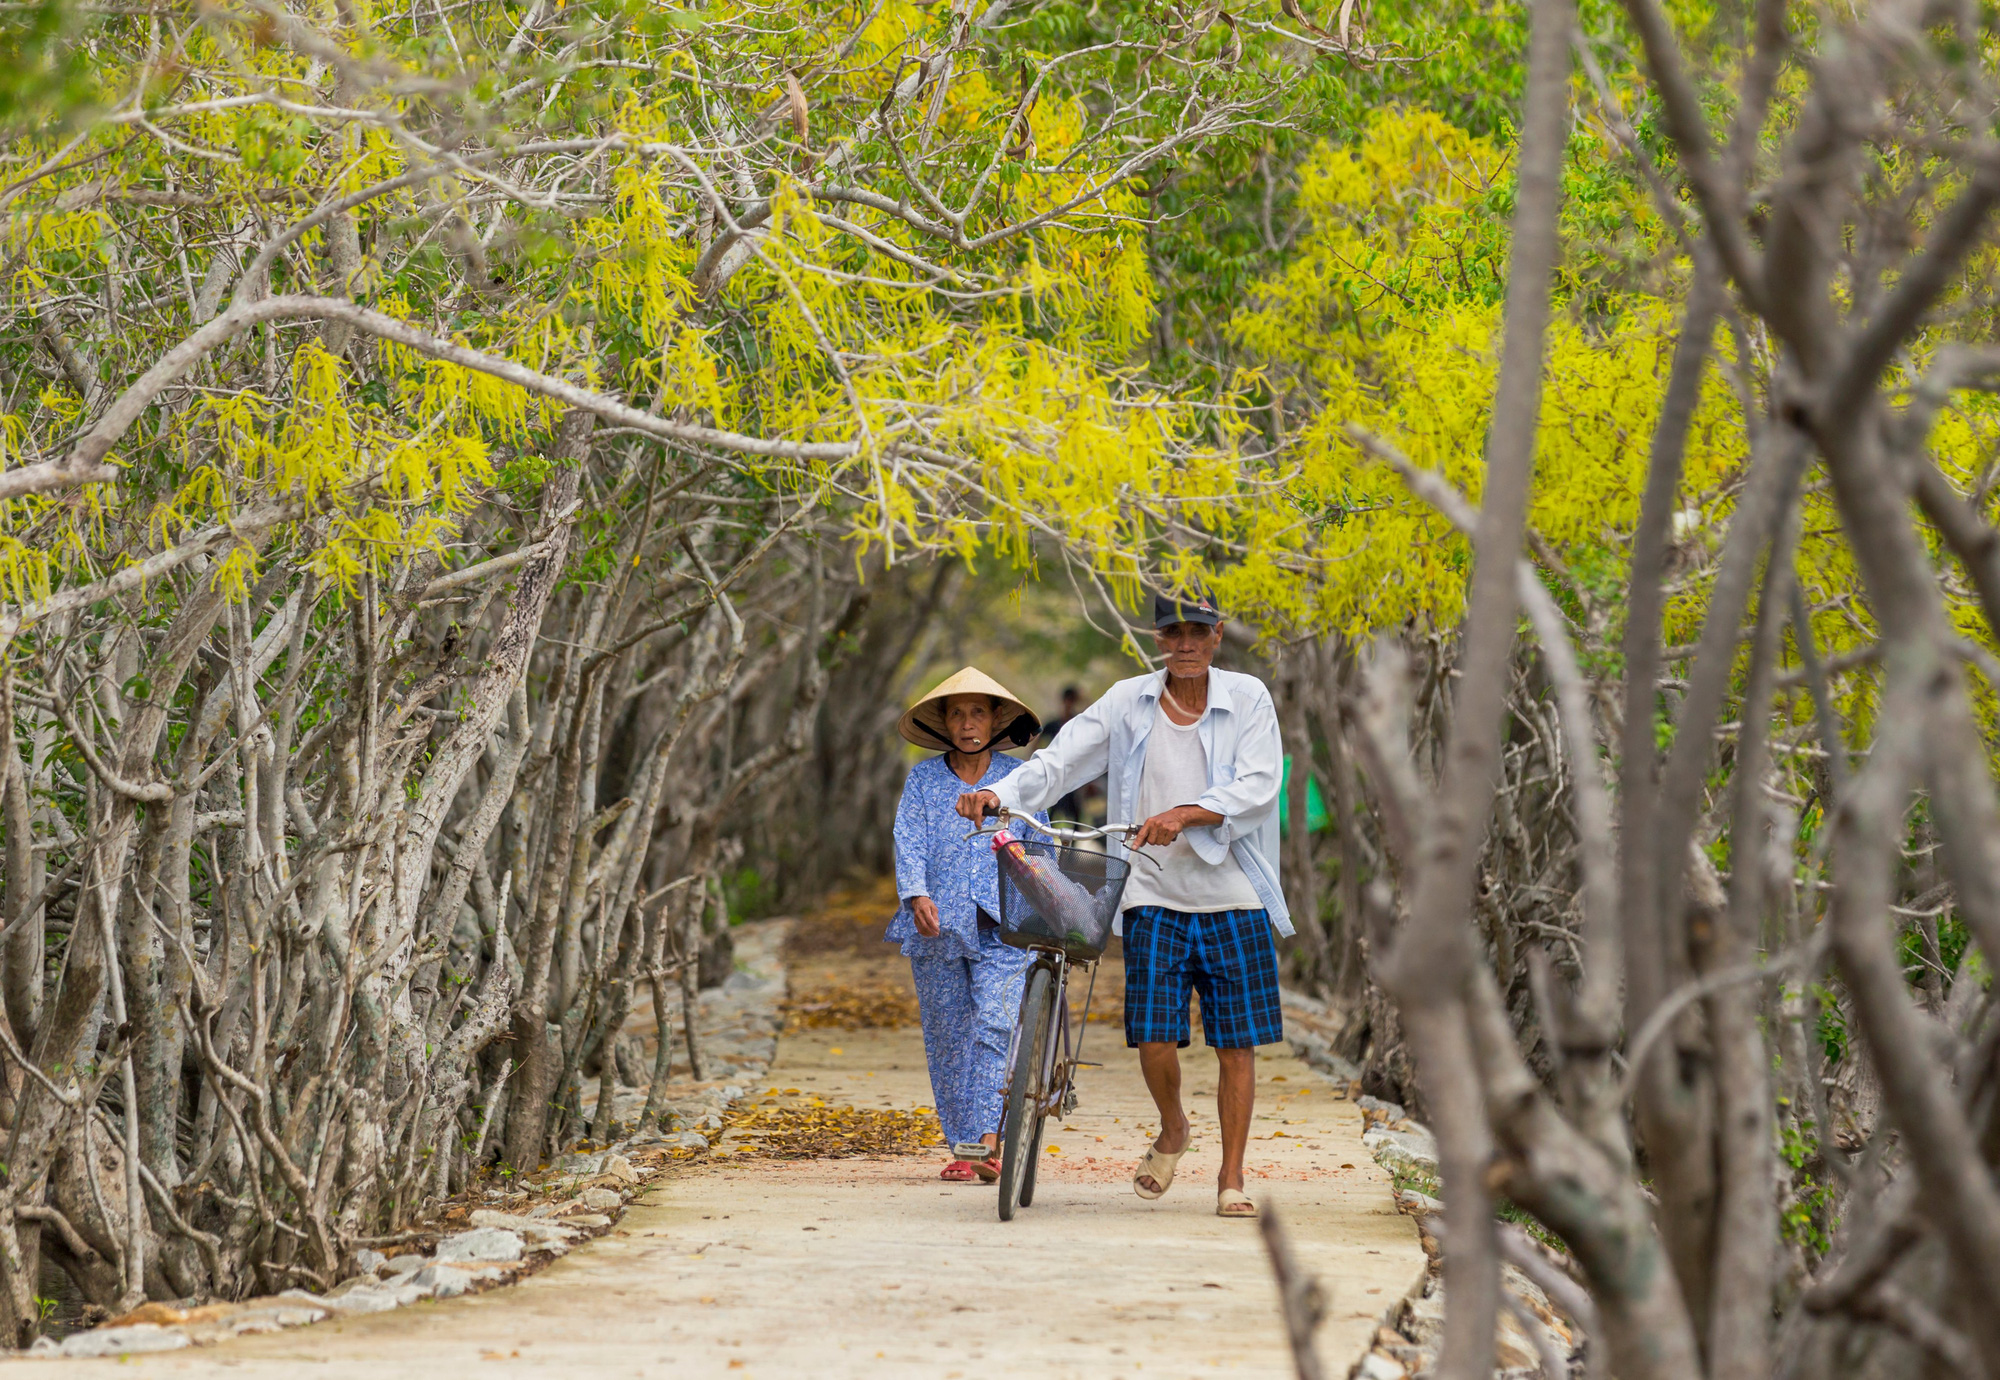 Local people walk on a road leading to Ru Cha mangrove forest in Huong Tra District, Thua Thien-Hue Province, Vietnam. Photo: Kelvin Long / Tuoi Tre